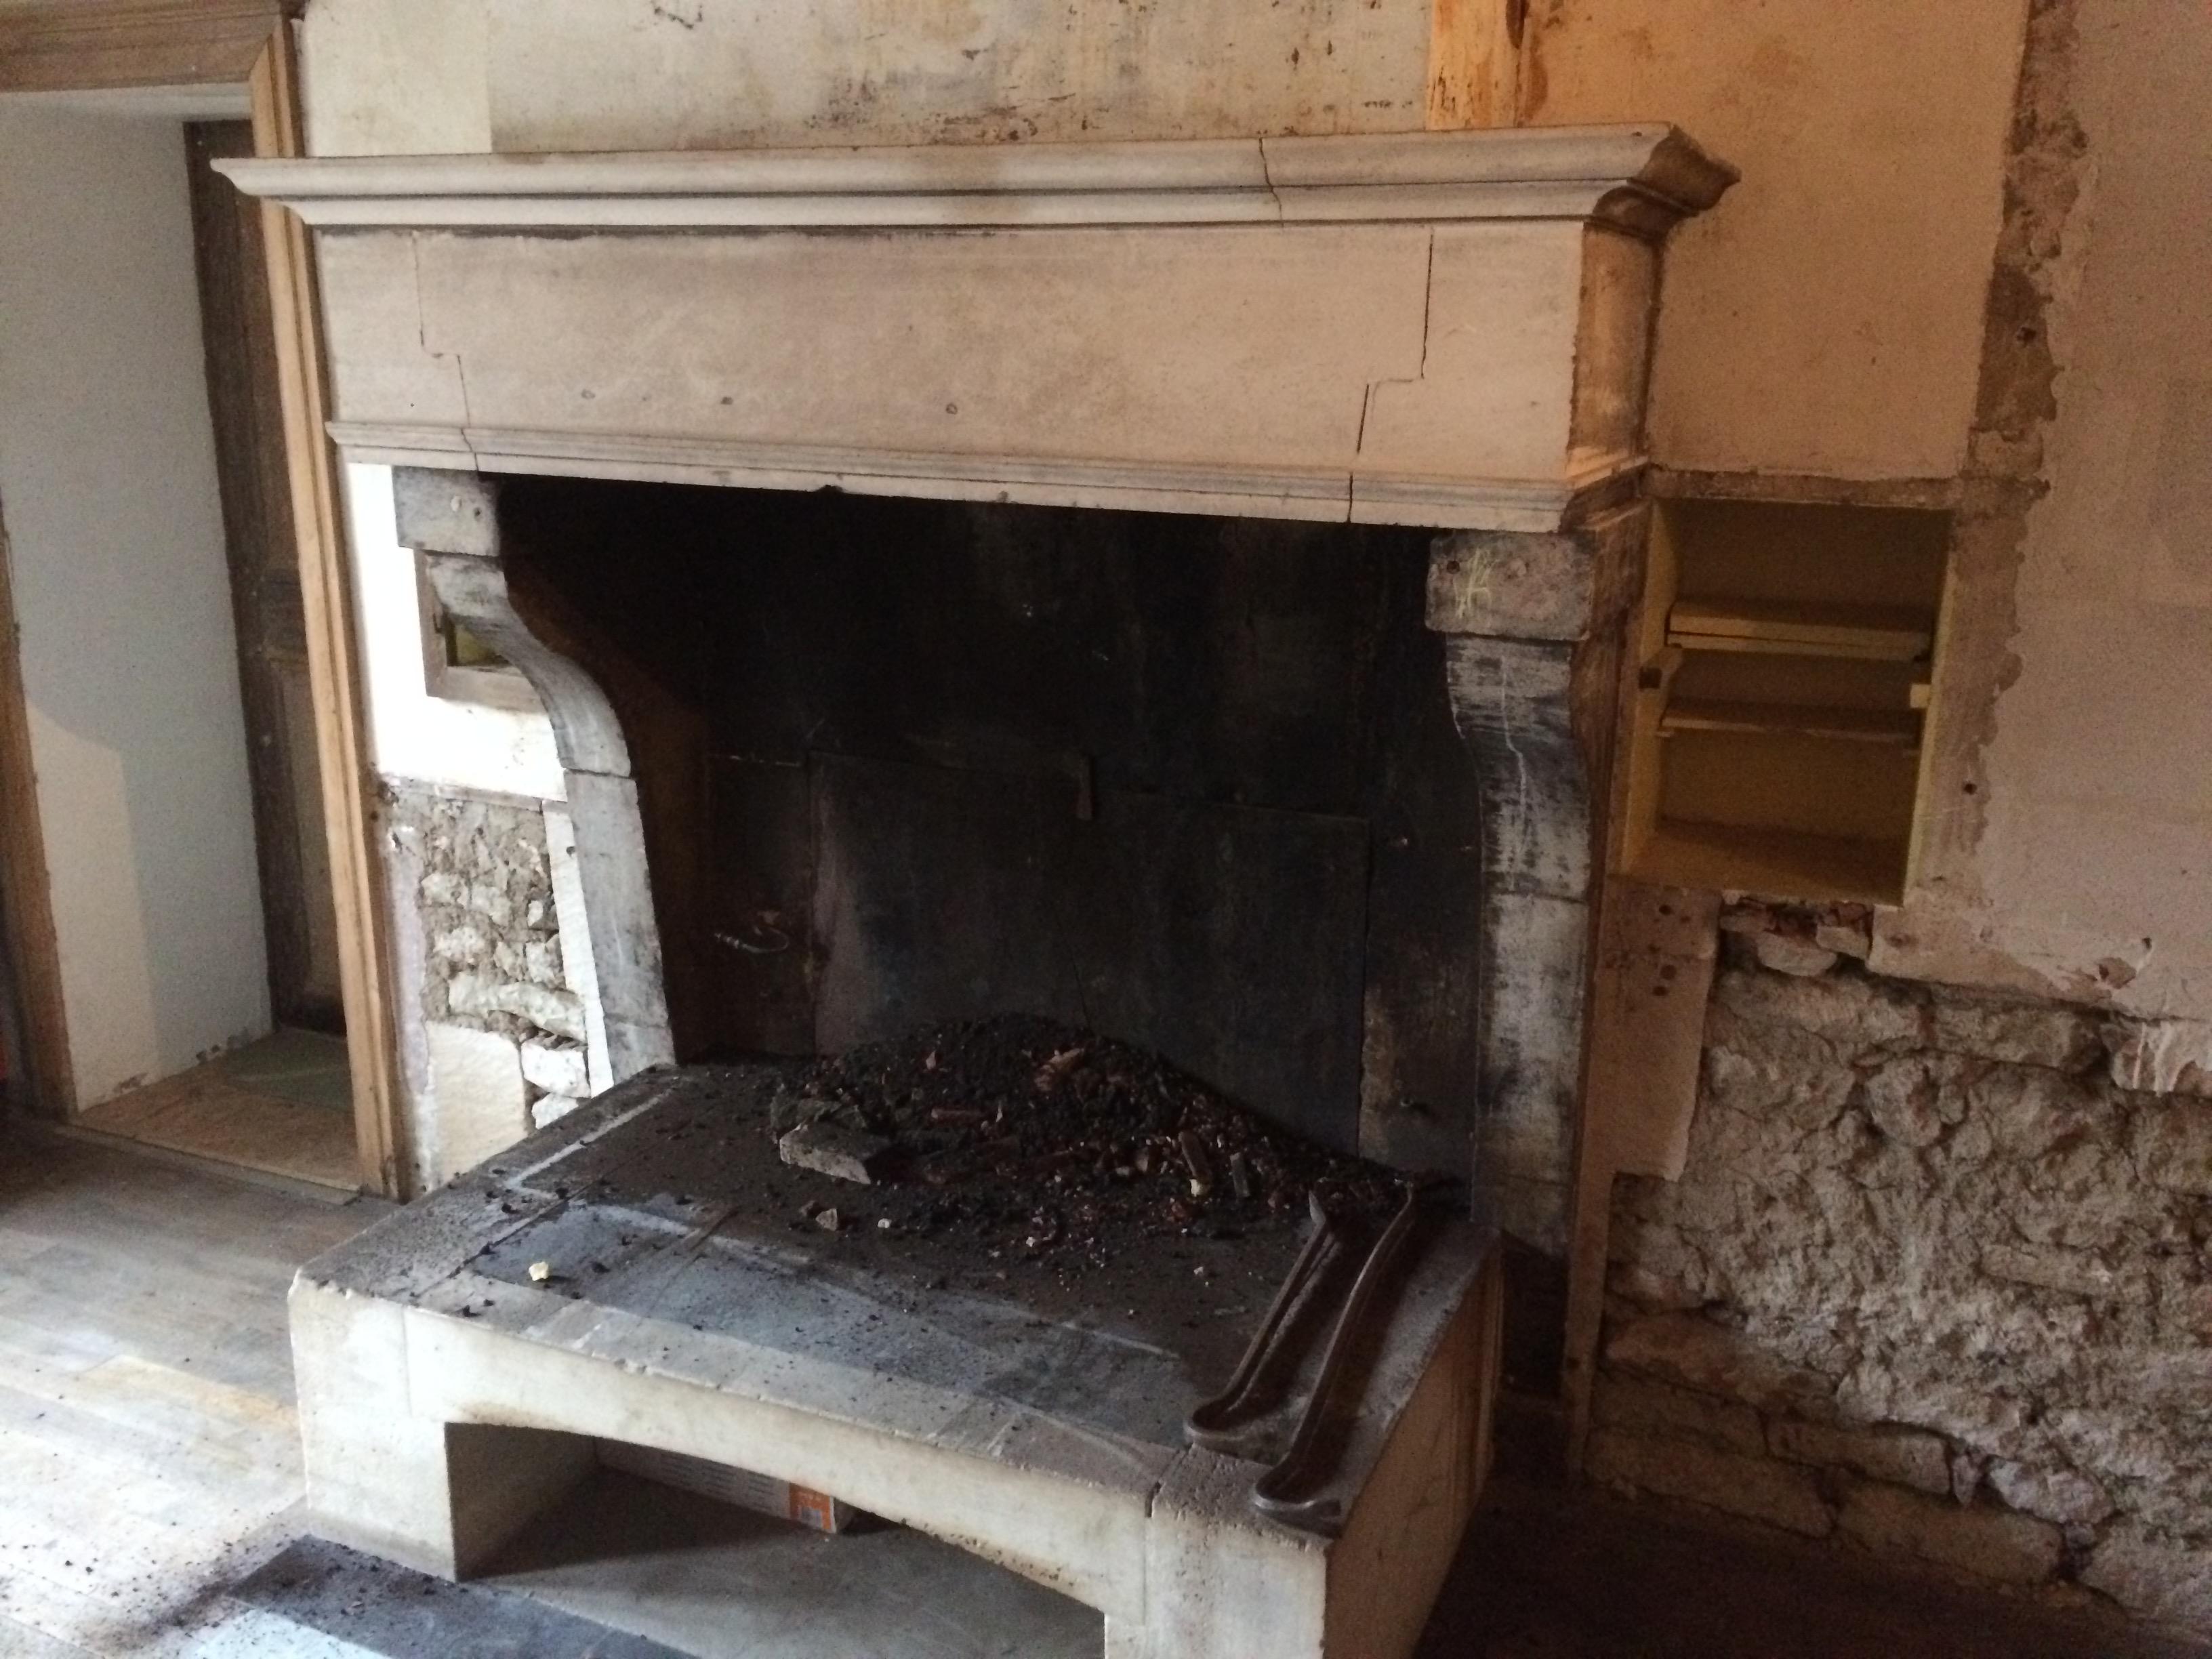 French antique limestone fireplace Louis XIII style 18th Century from France, hand-crafted from that period.
Original photos online, the entire fireplace is ready now for new installation.
Available right now.
Interior firebox dimensions:
Width 50.4